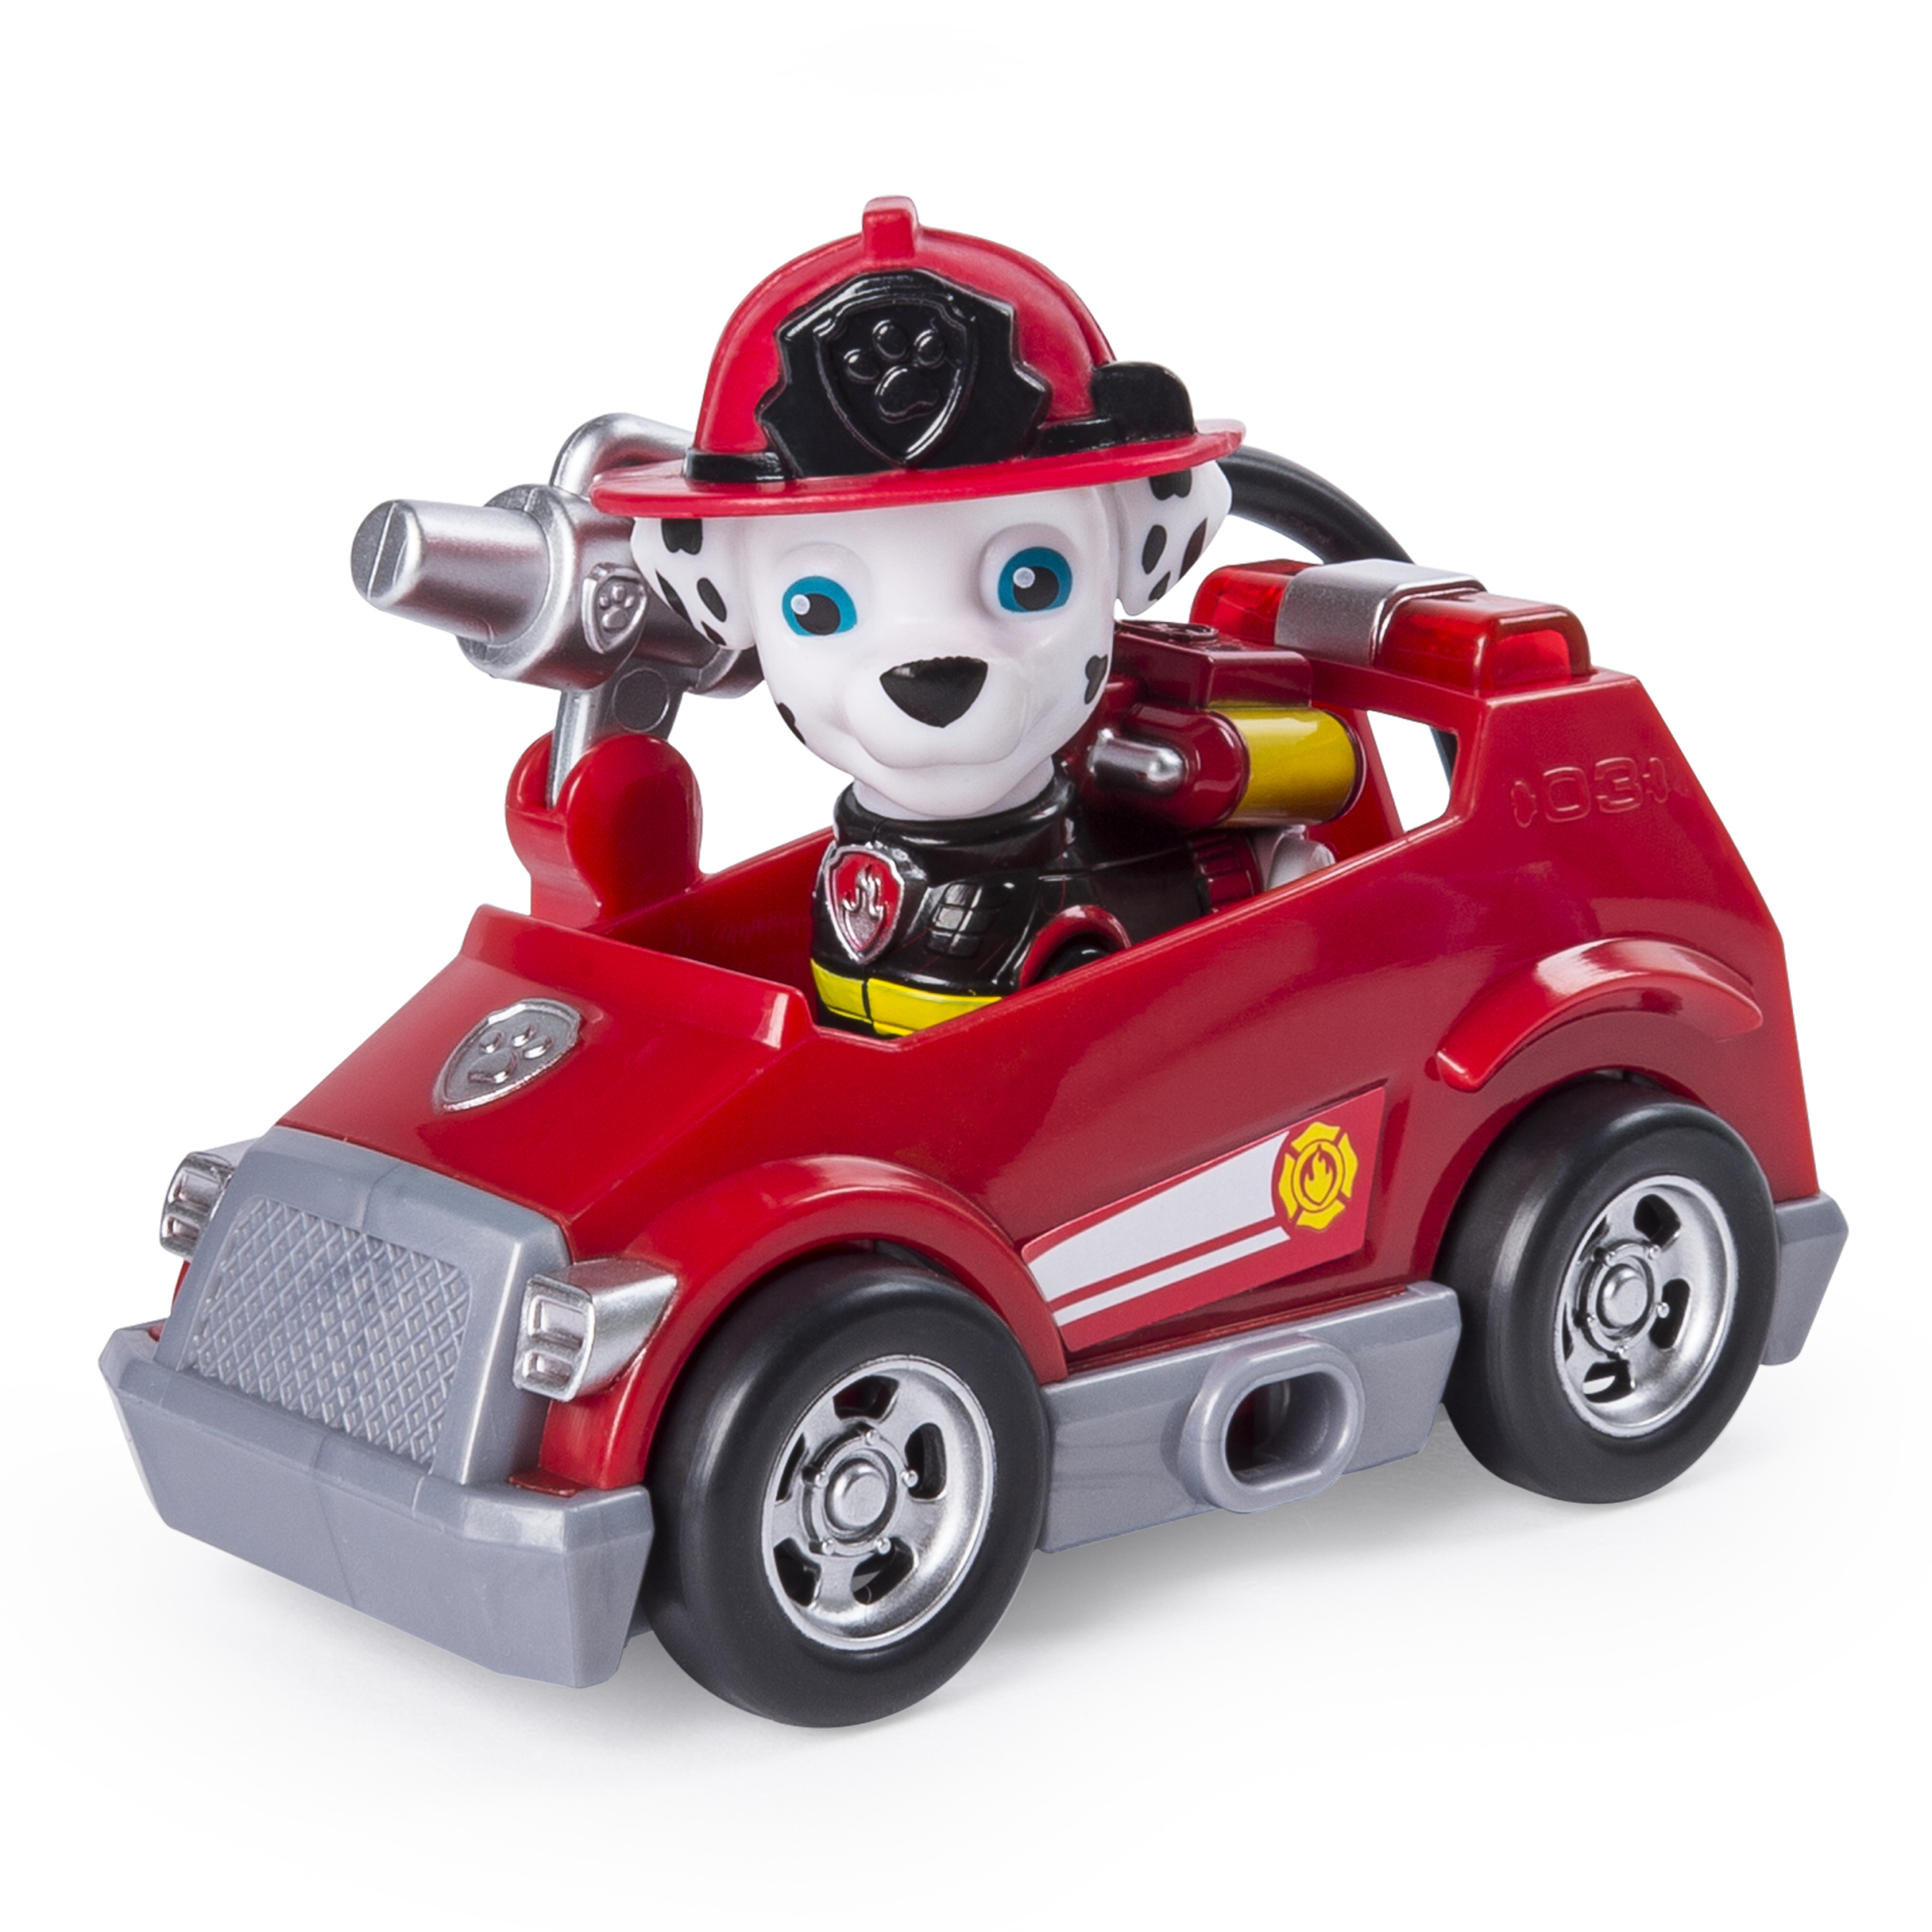 PAW Patrol Ultimate Rescue, Marshall’s Mini Fire Cart with Collectible Figure, for Ages 3 and Up - image 4 of 6